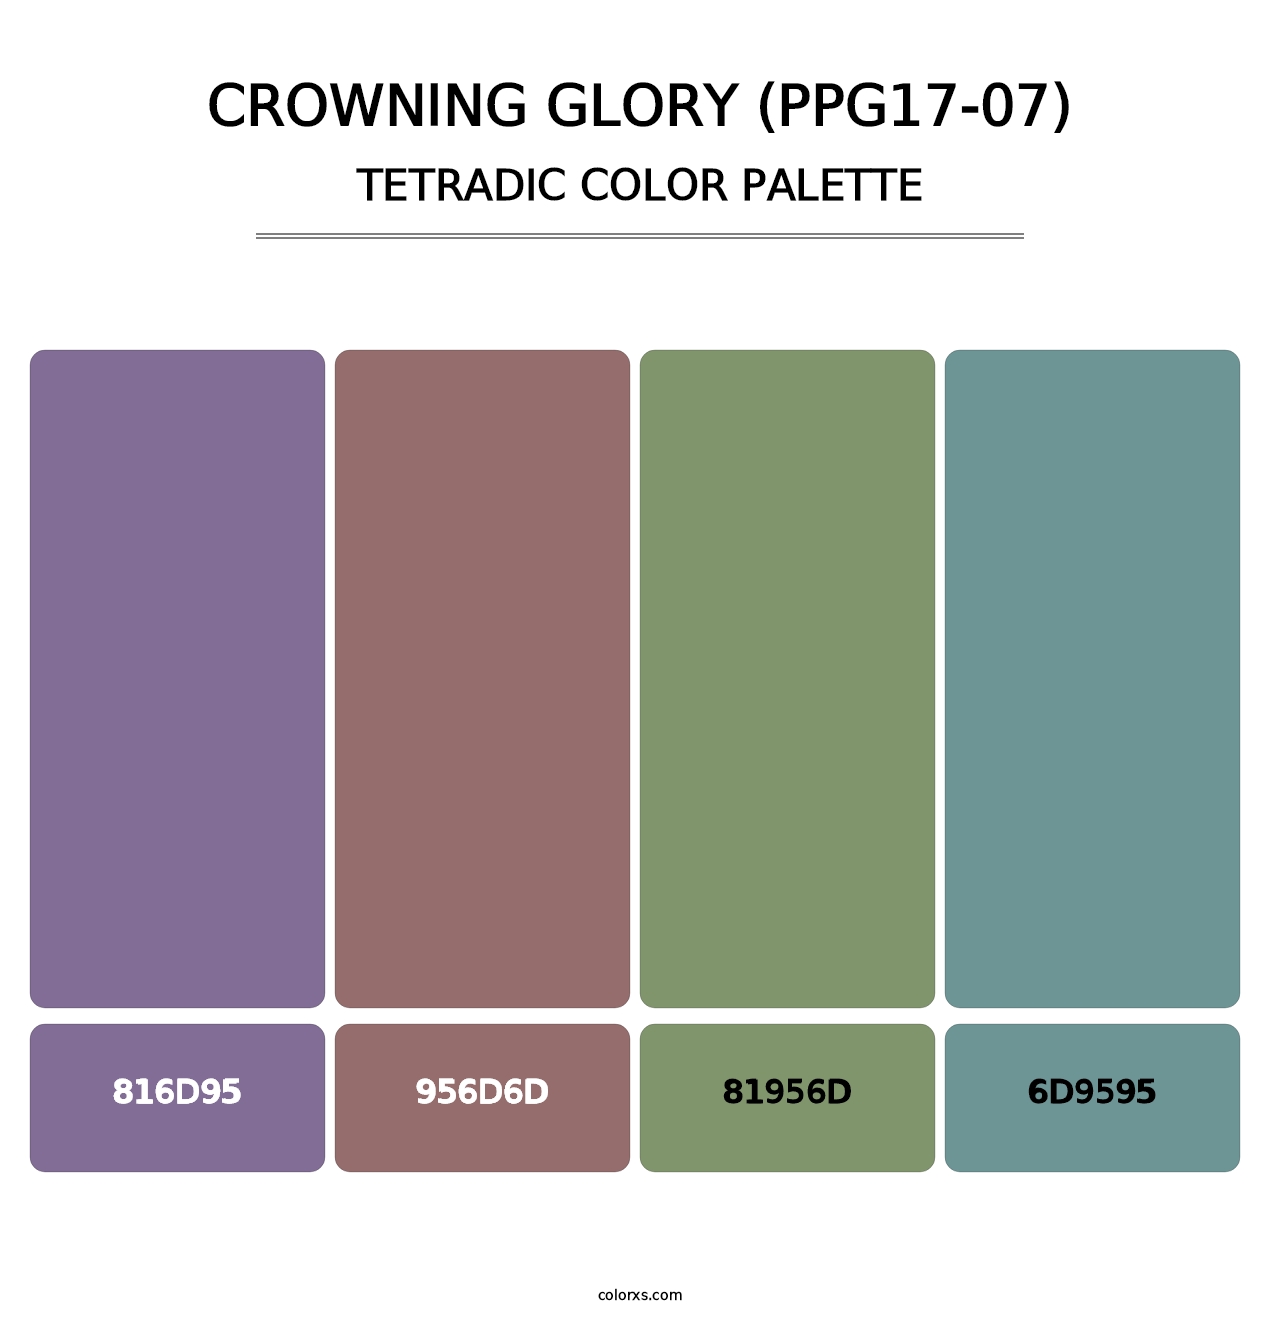 Crowning Glory (PPG17-07) - Tetradic Color Palette